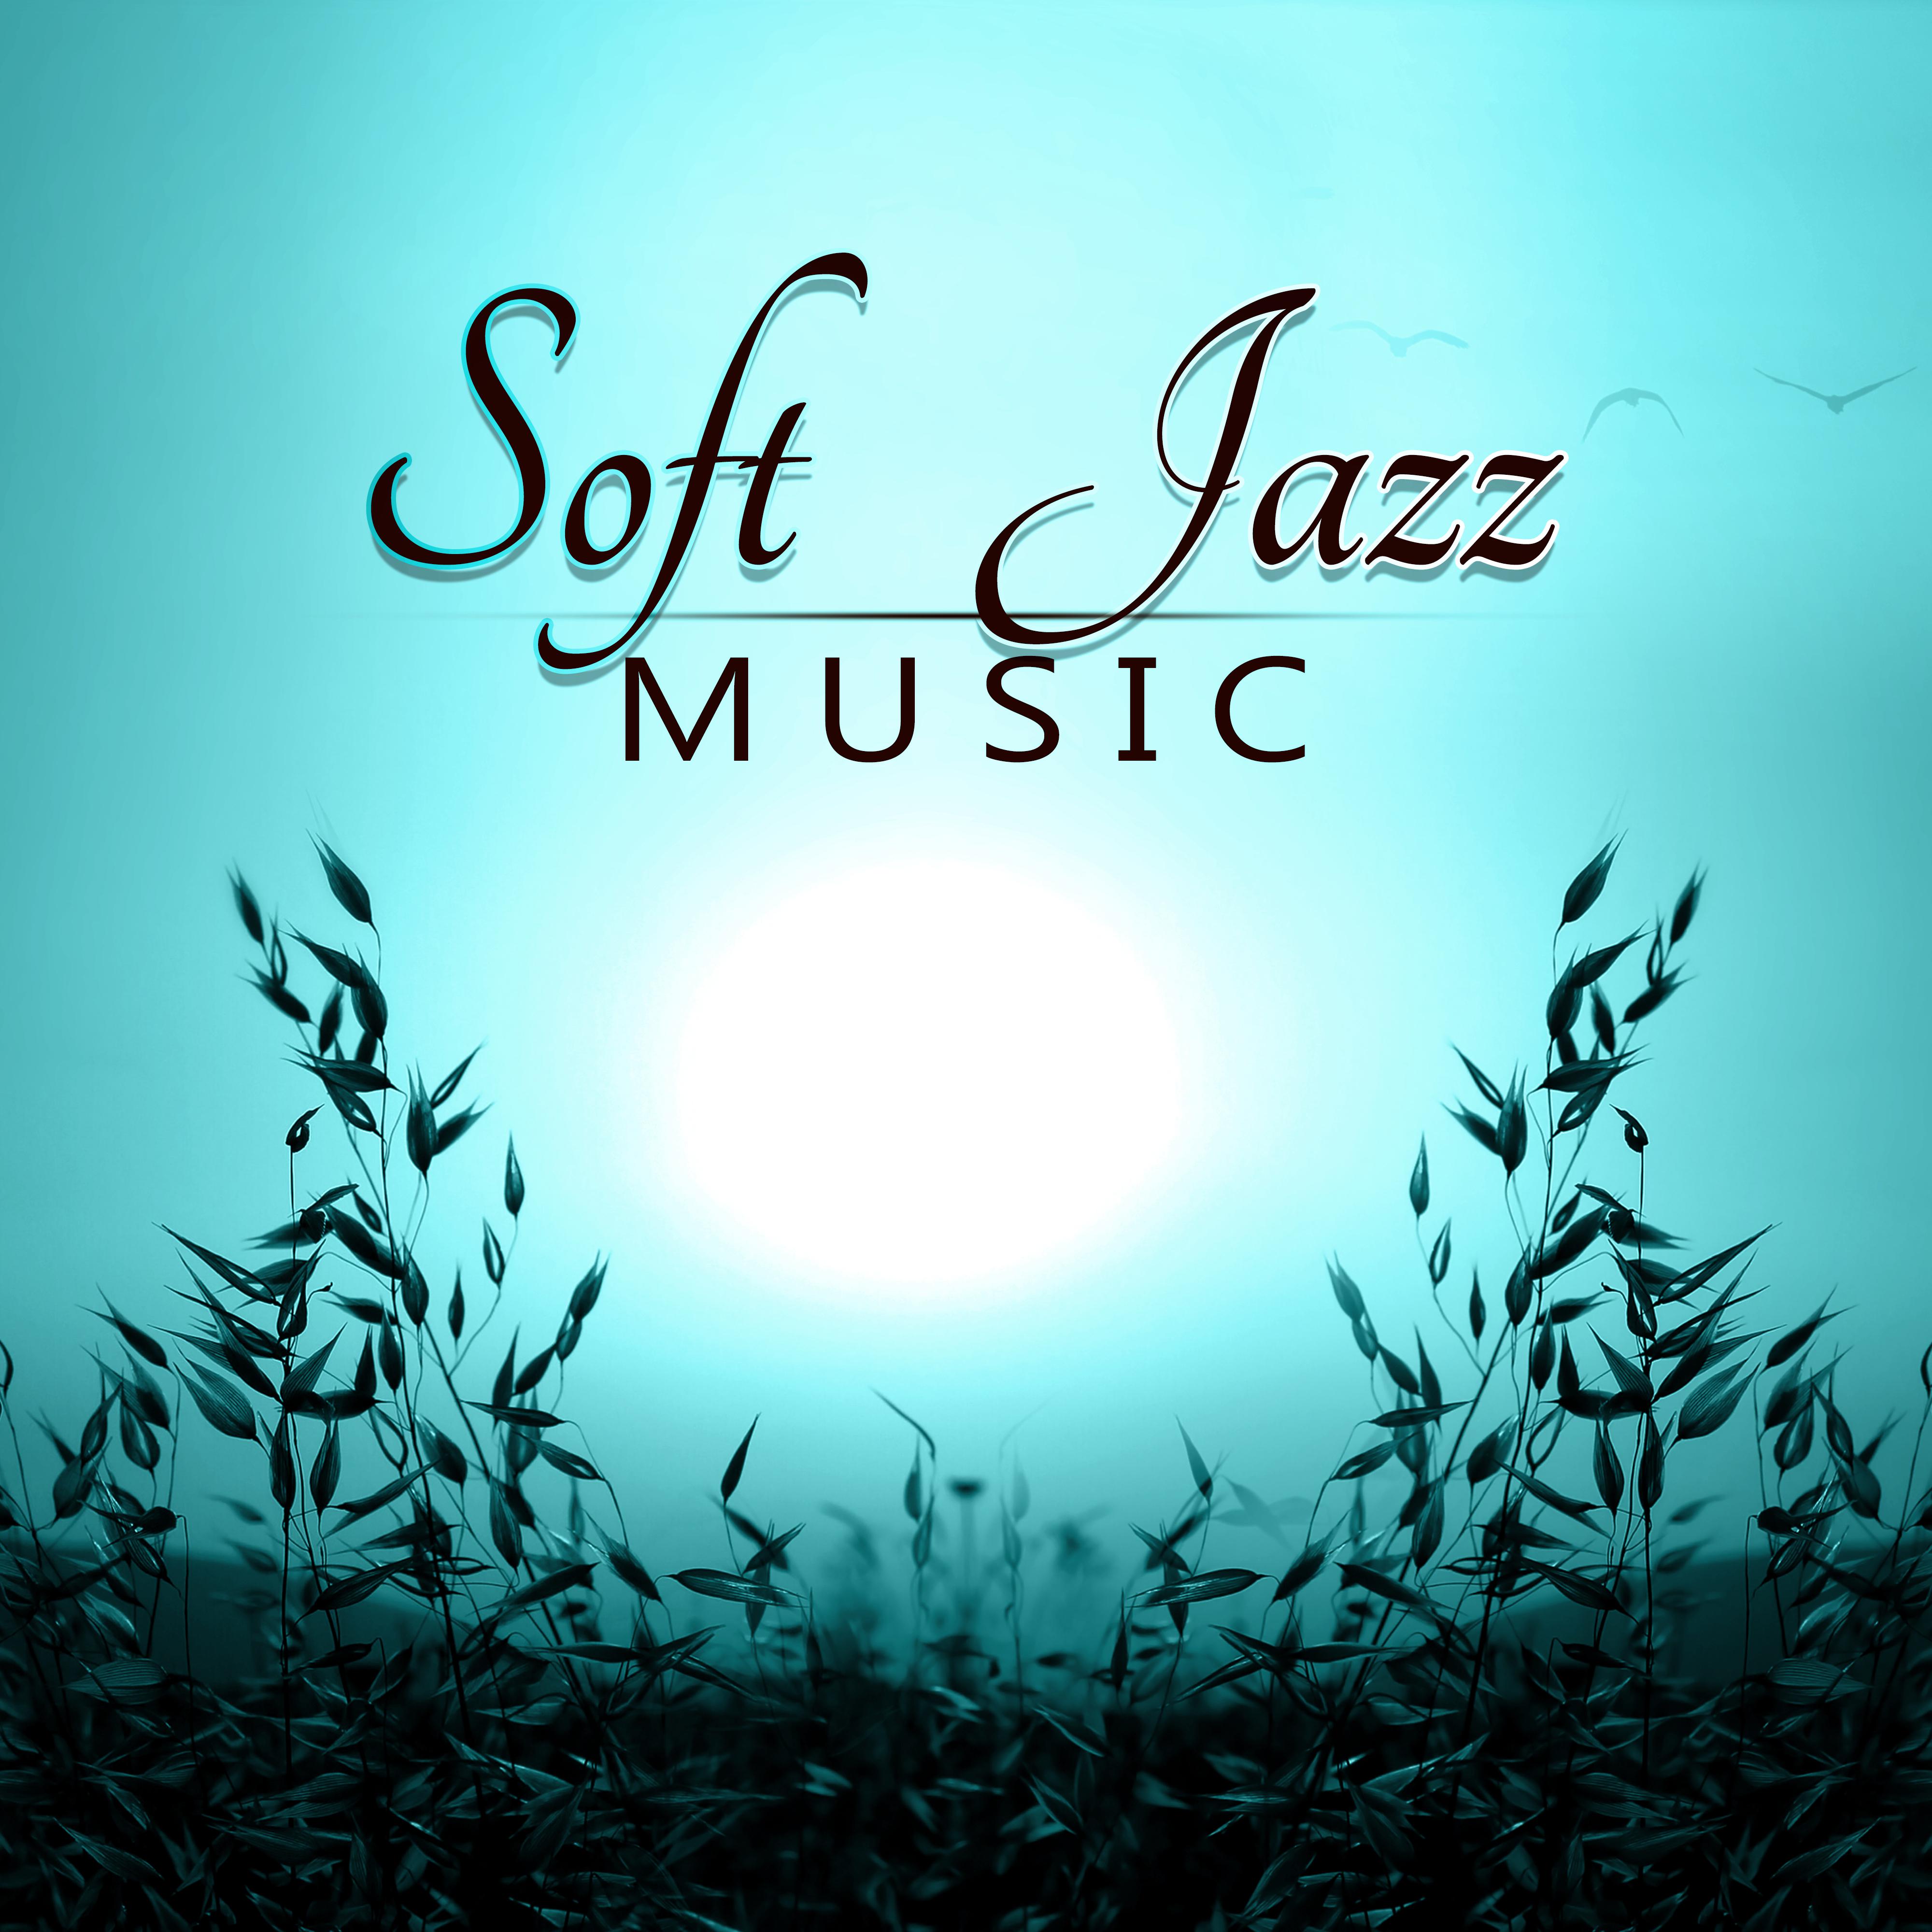 Soft Jazz Music - Jazz Songs for Exploring Your Mind, Music Explosion of Jazz, Stress Relief of Piano Music, Focus on Learning, Easy Study with Smooth Jazz